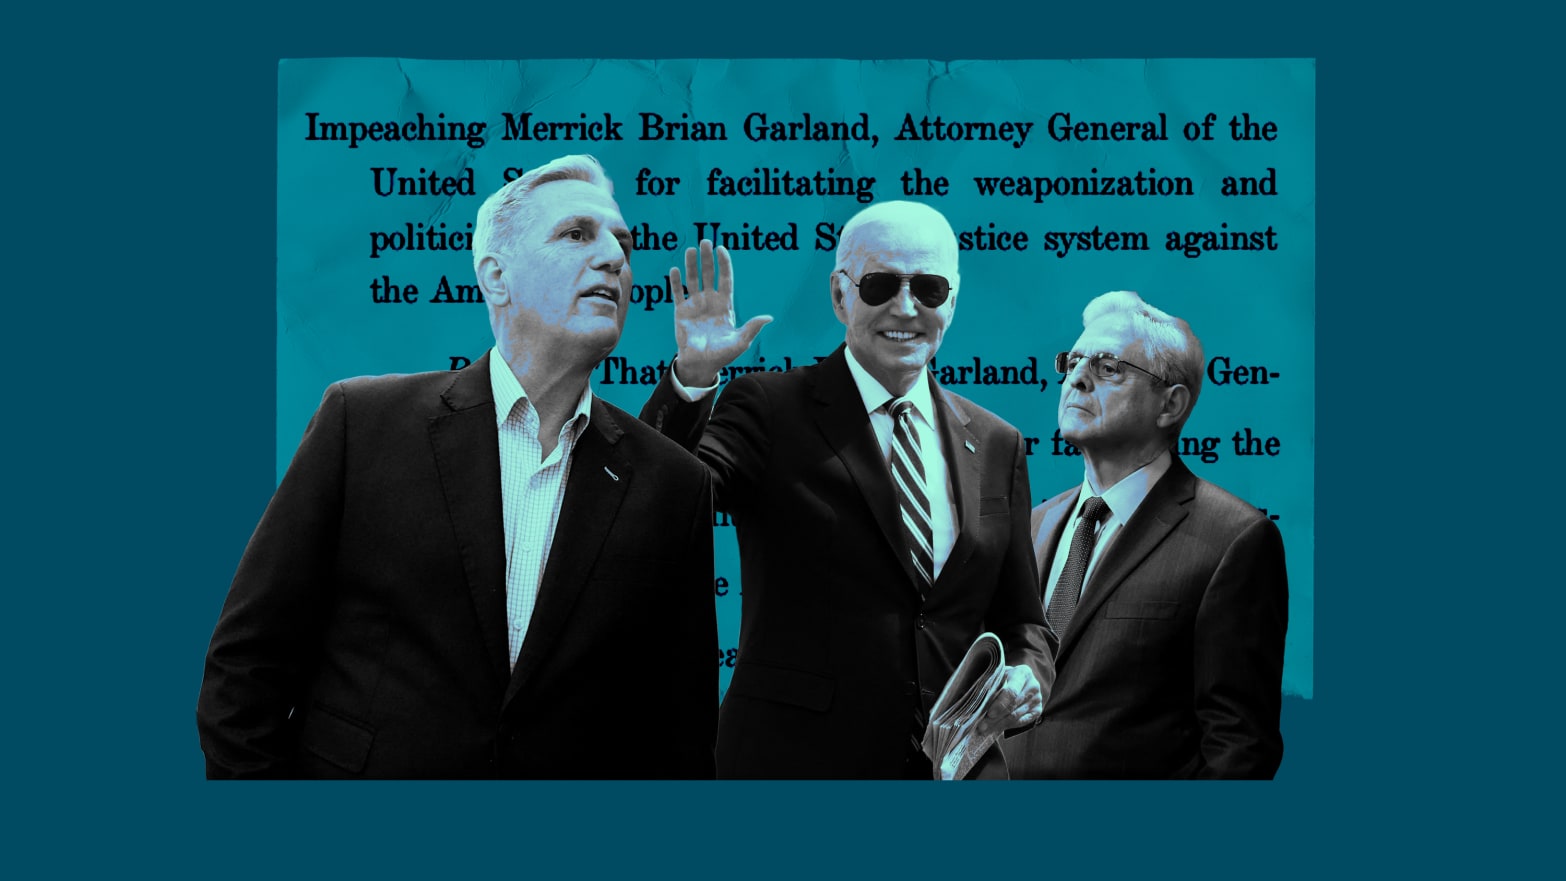 A photo illustration of Speaker Kevin McCarthy, President Joe Biden, and Attorney General Merrick Garland with impeachment text.